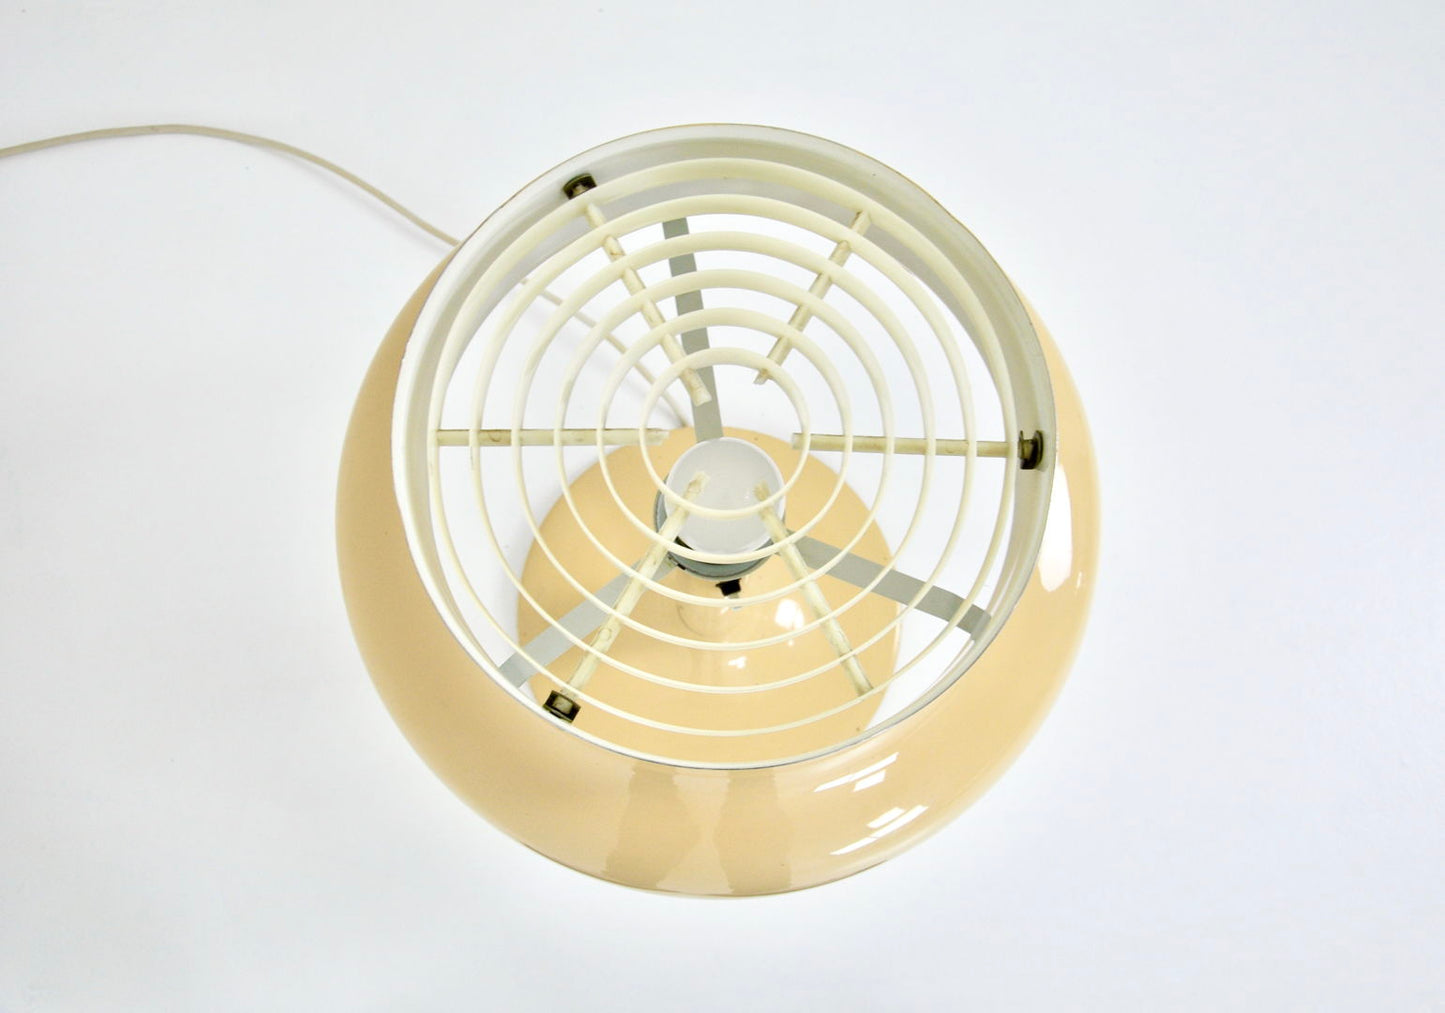 Table lamp by Anders Pehrson for Ateljé Lyktan, 1970s